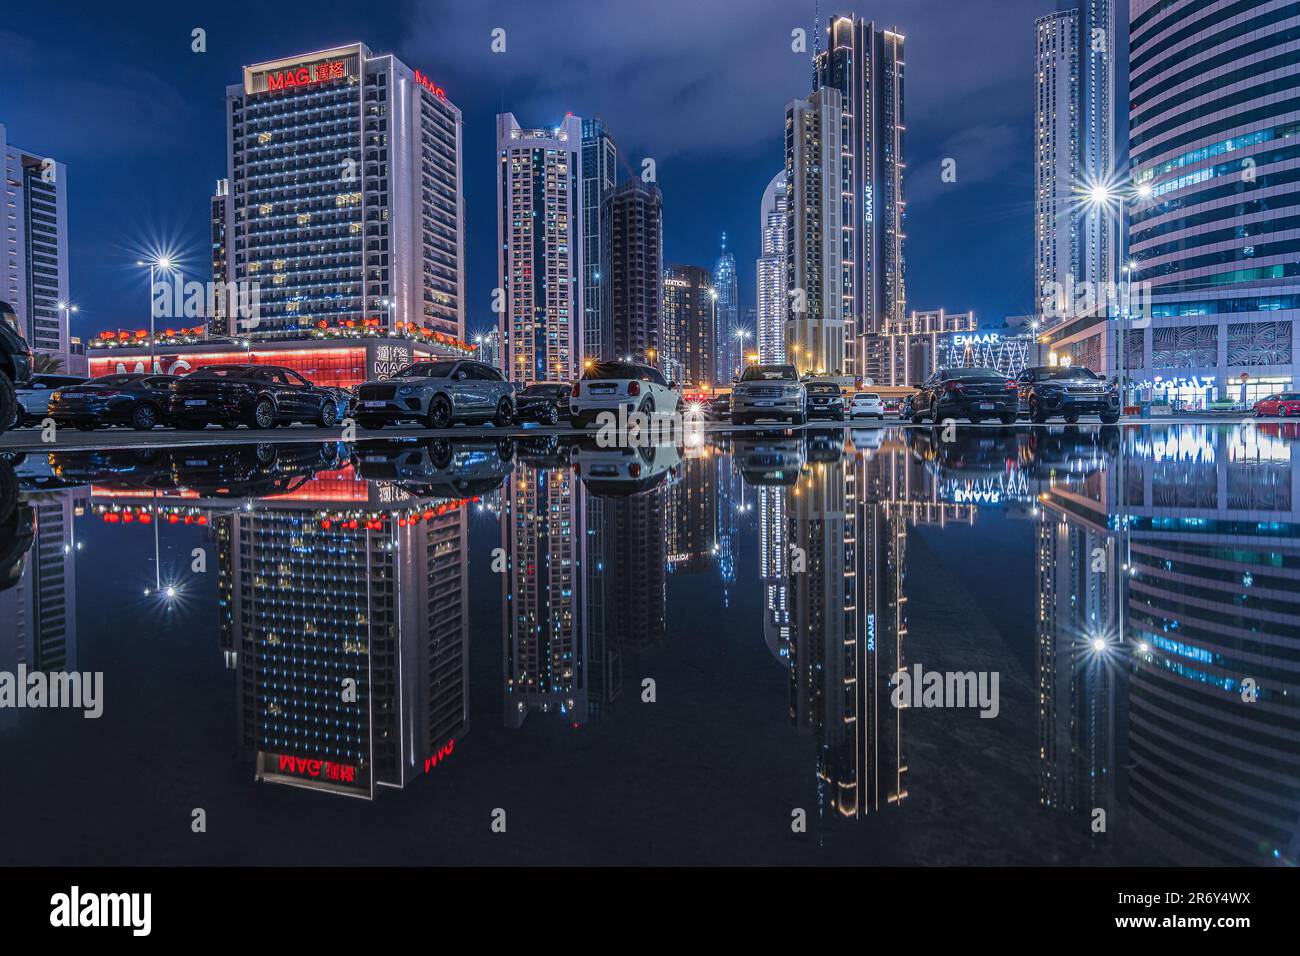 Skyscrapers of Dubai at night. City skyline in United Arab Emirates at blue hour. Reflections from illuminated commercial buildings in inancial center Stock Photo